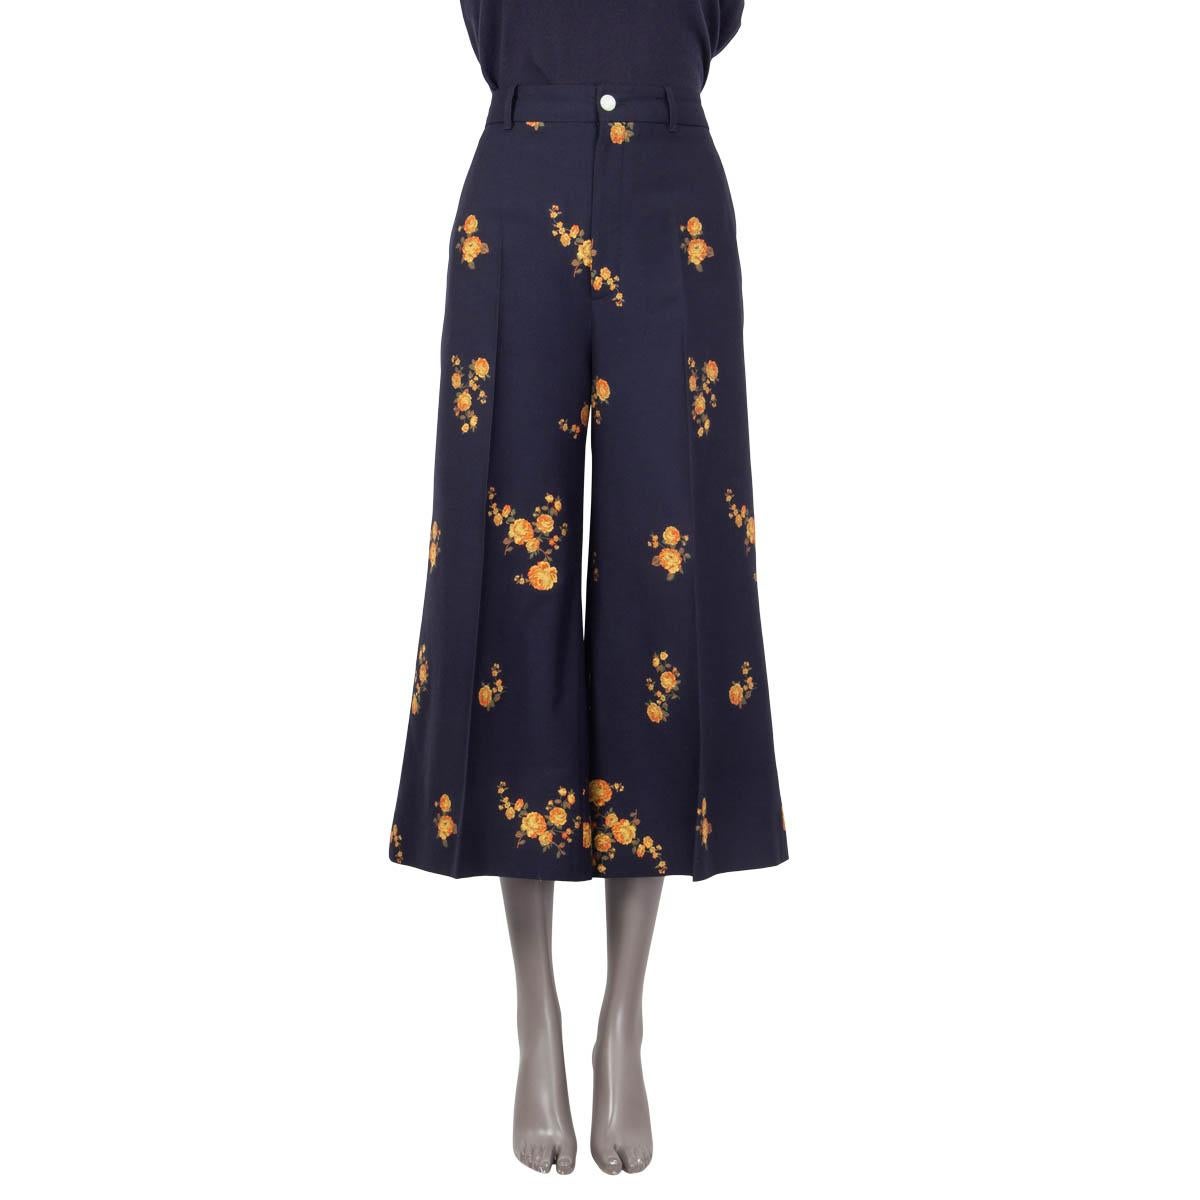 100% authentic Gucci high-waist culotte pants in dark navy blue cotton (60%) and wool (40%). Cruise 2019 collection. Feature belt loops, side and back pockets and camellia print in orange, olive green and yellow. Open with concealed zipper and a